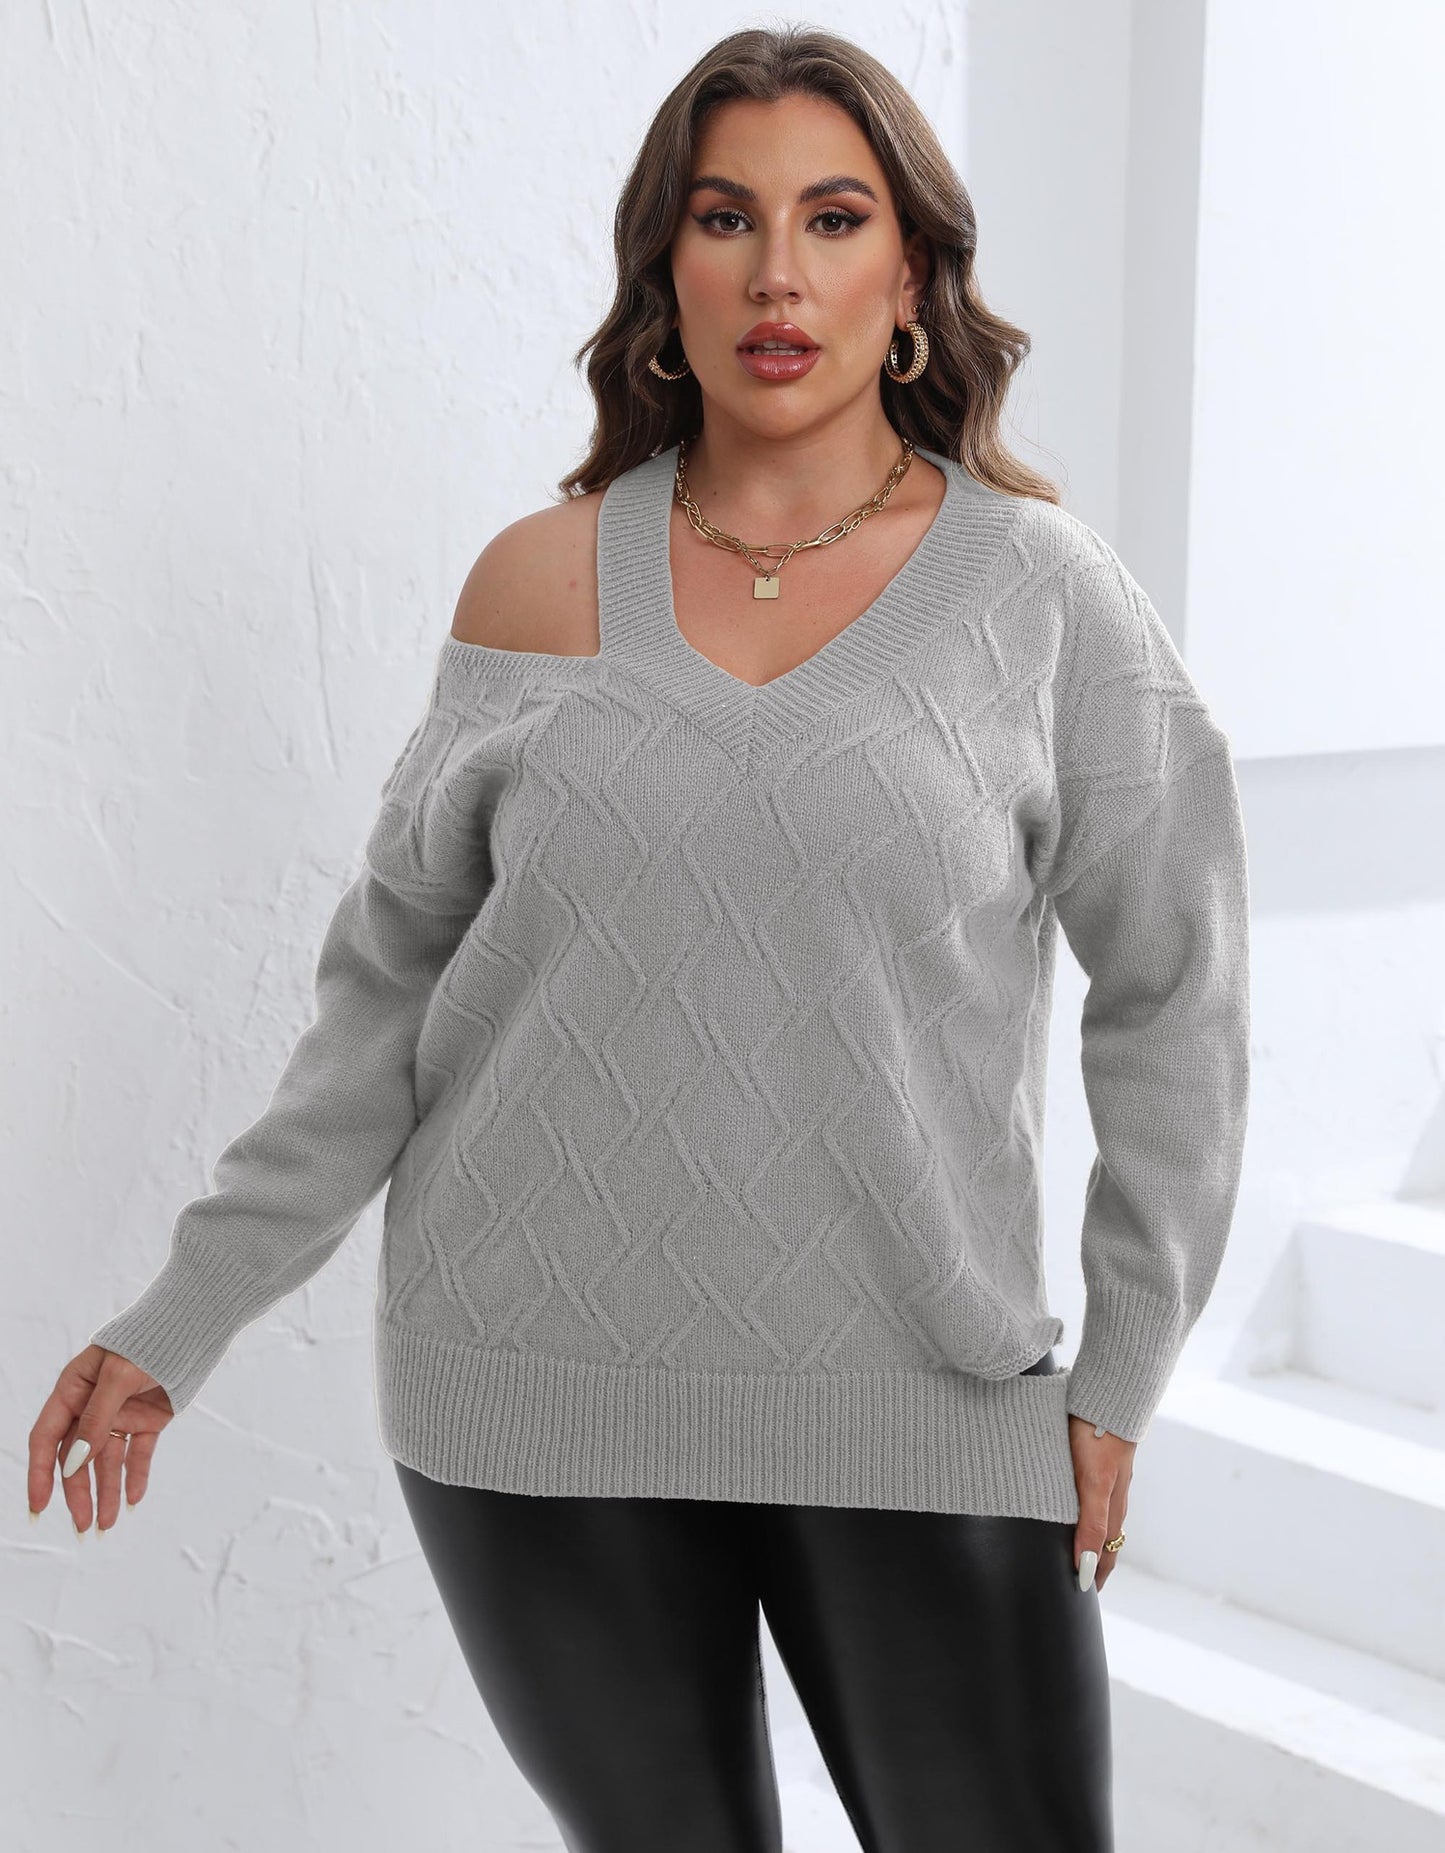 BamBam Women's Fall Winter Pullover Tops Plus Size Women's Style Cutout Shoulder Knit V Neck Sweater - BamBam